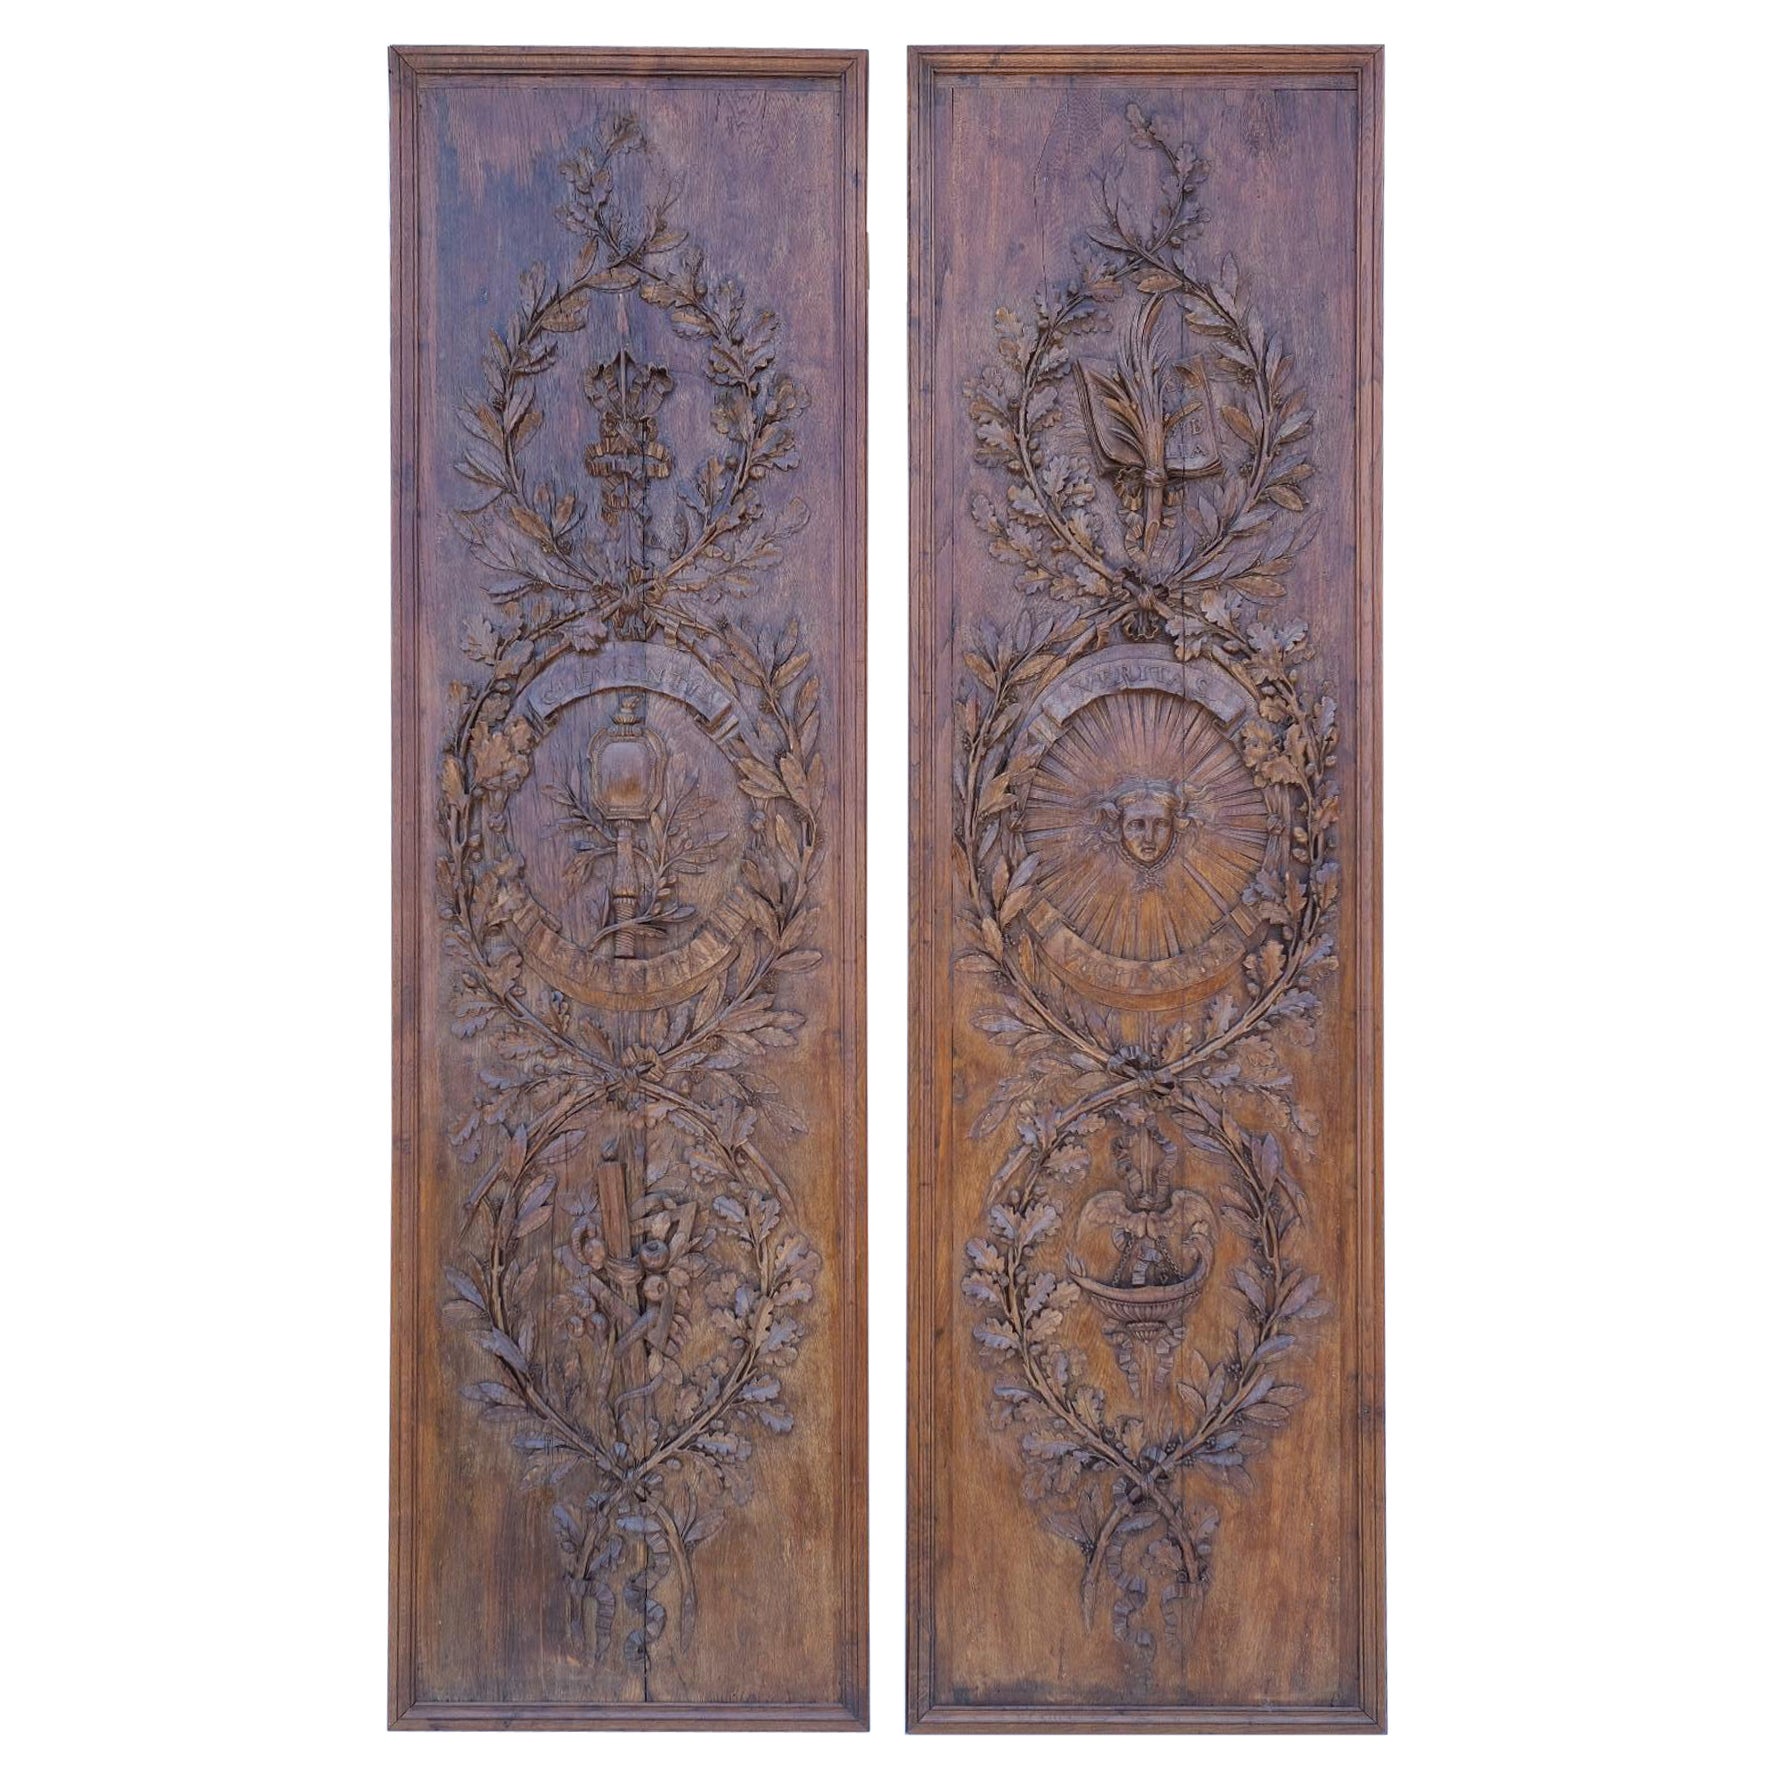 Late 18th Century French Carved Panels